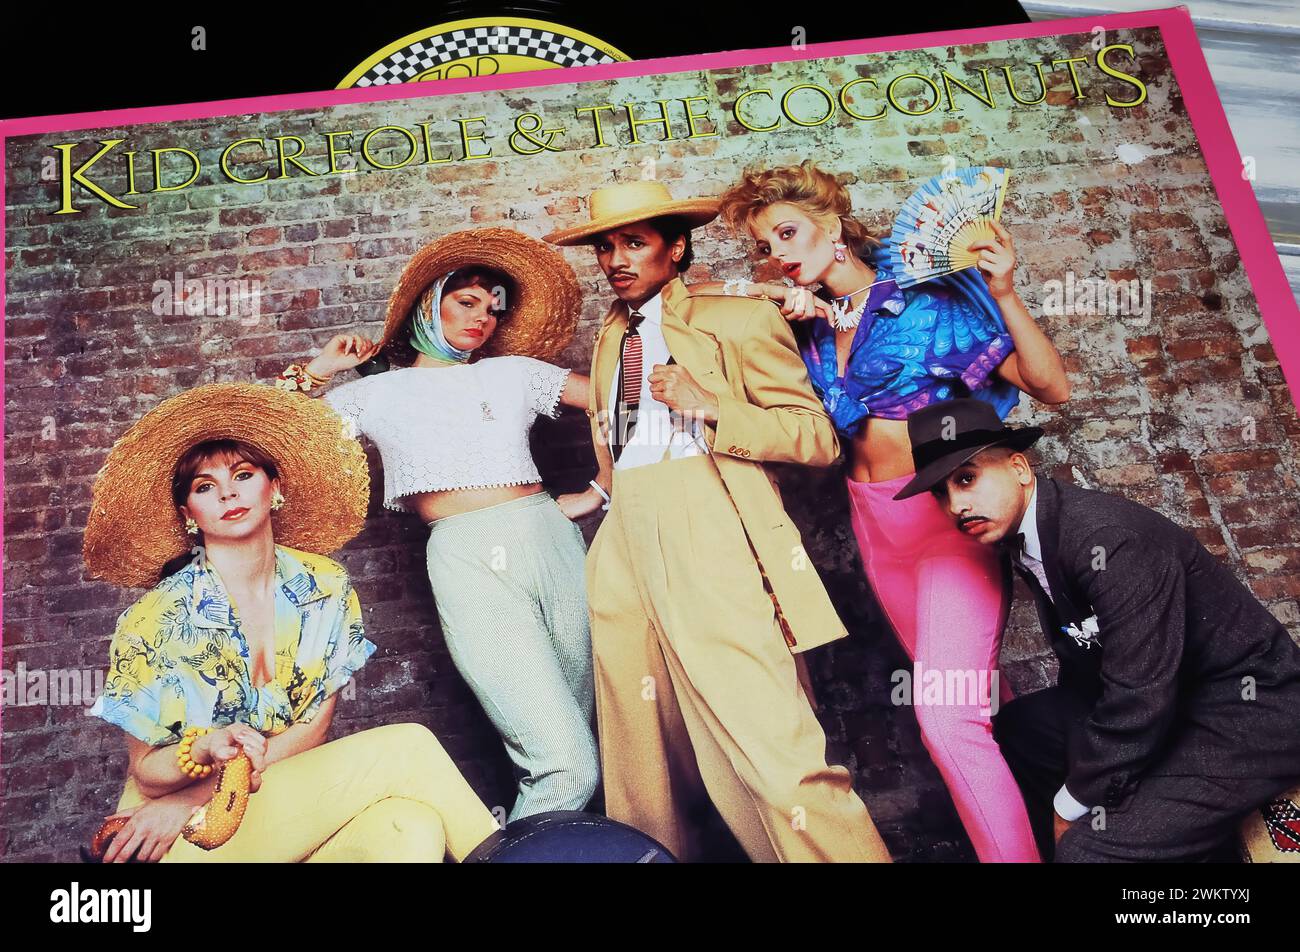 Viersen, Germany - January 9. 2024: Closeup of Kid Creole and the Coconuts vinyl record hit album cover Tropical Gangsters from 1982 Stock Photo